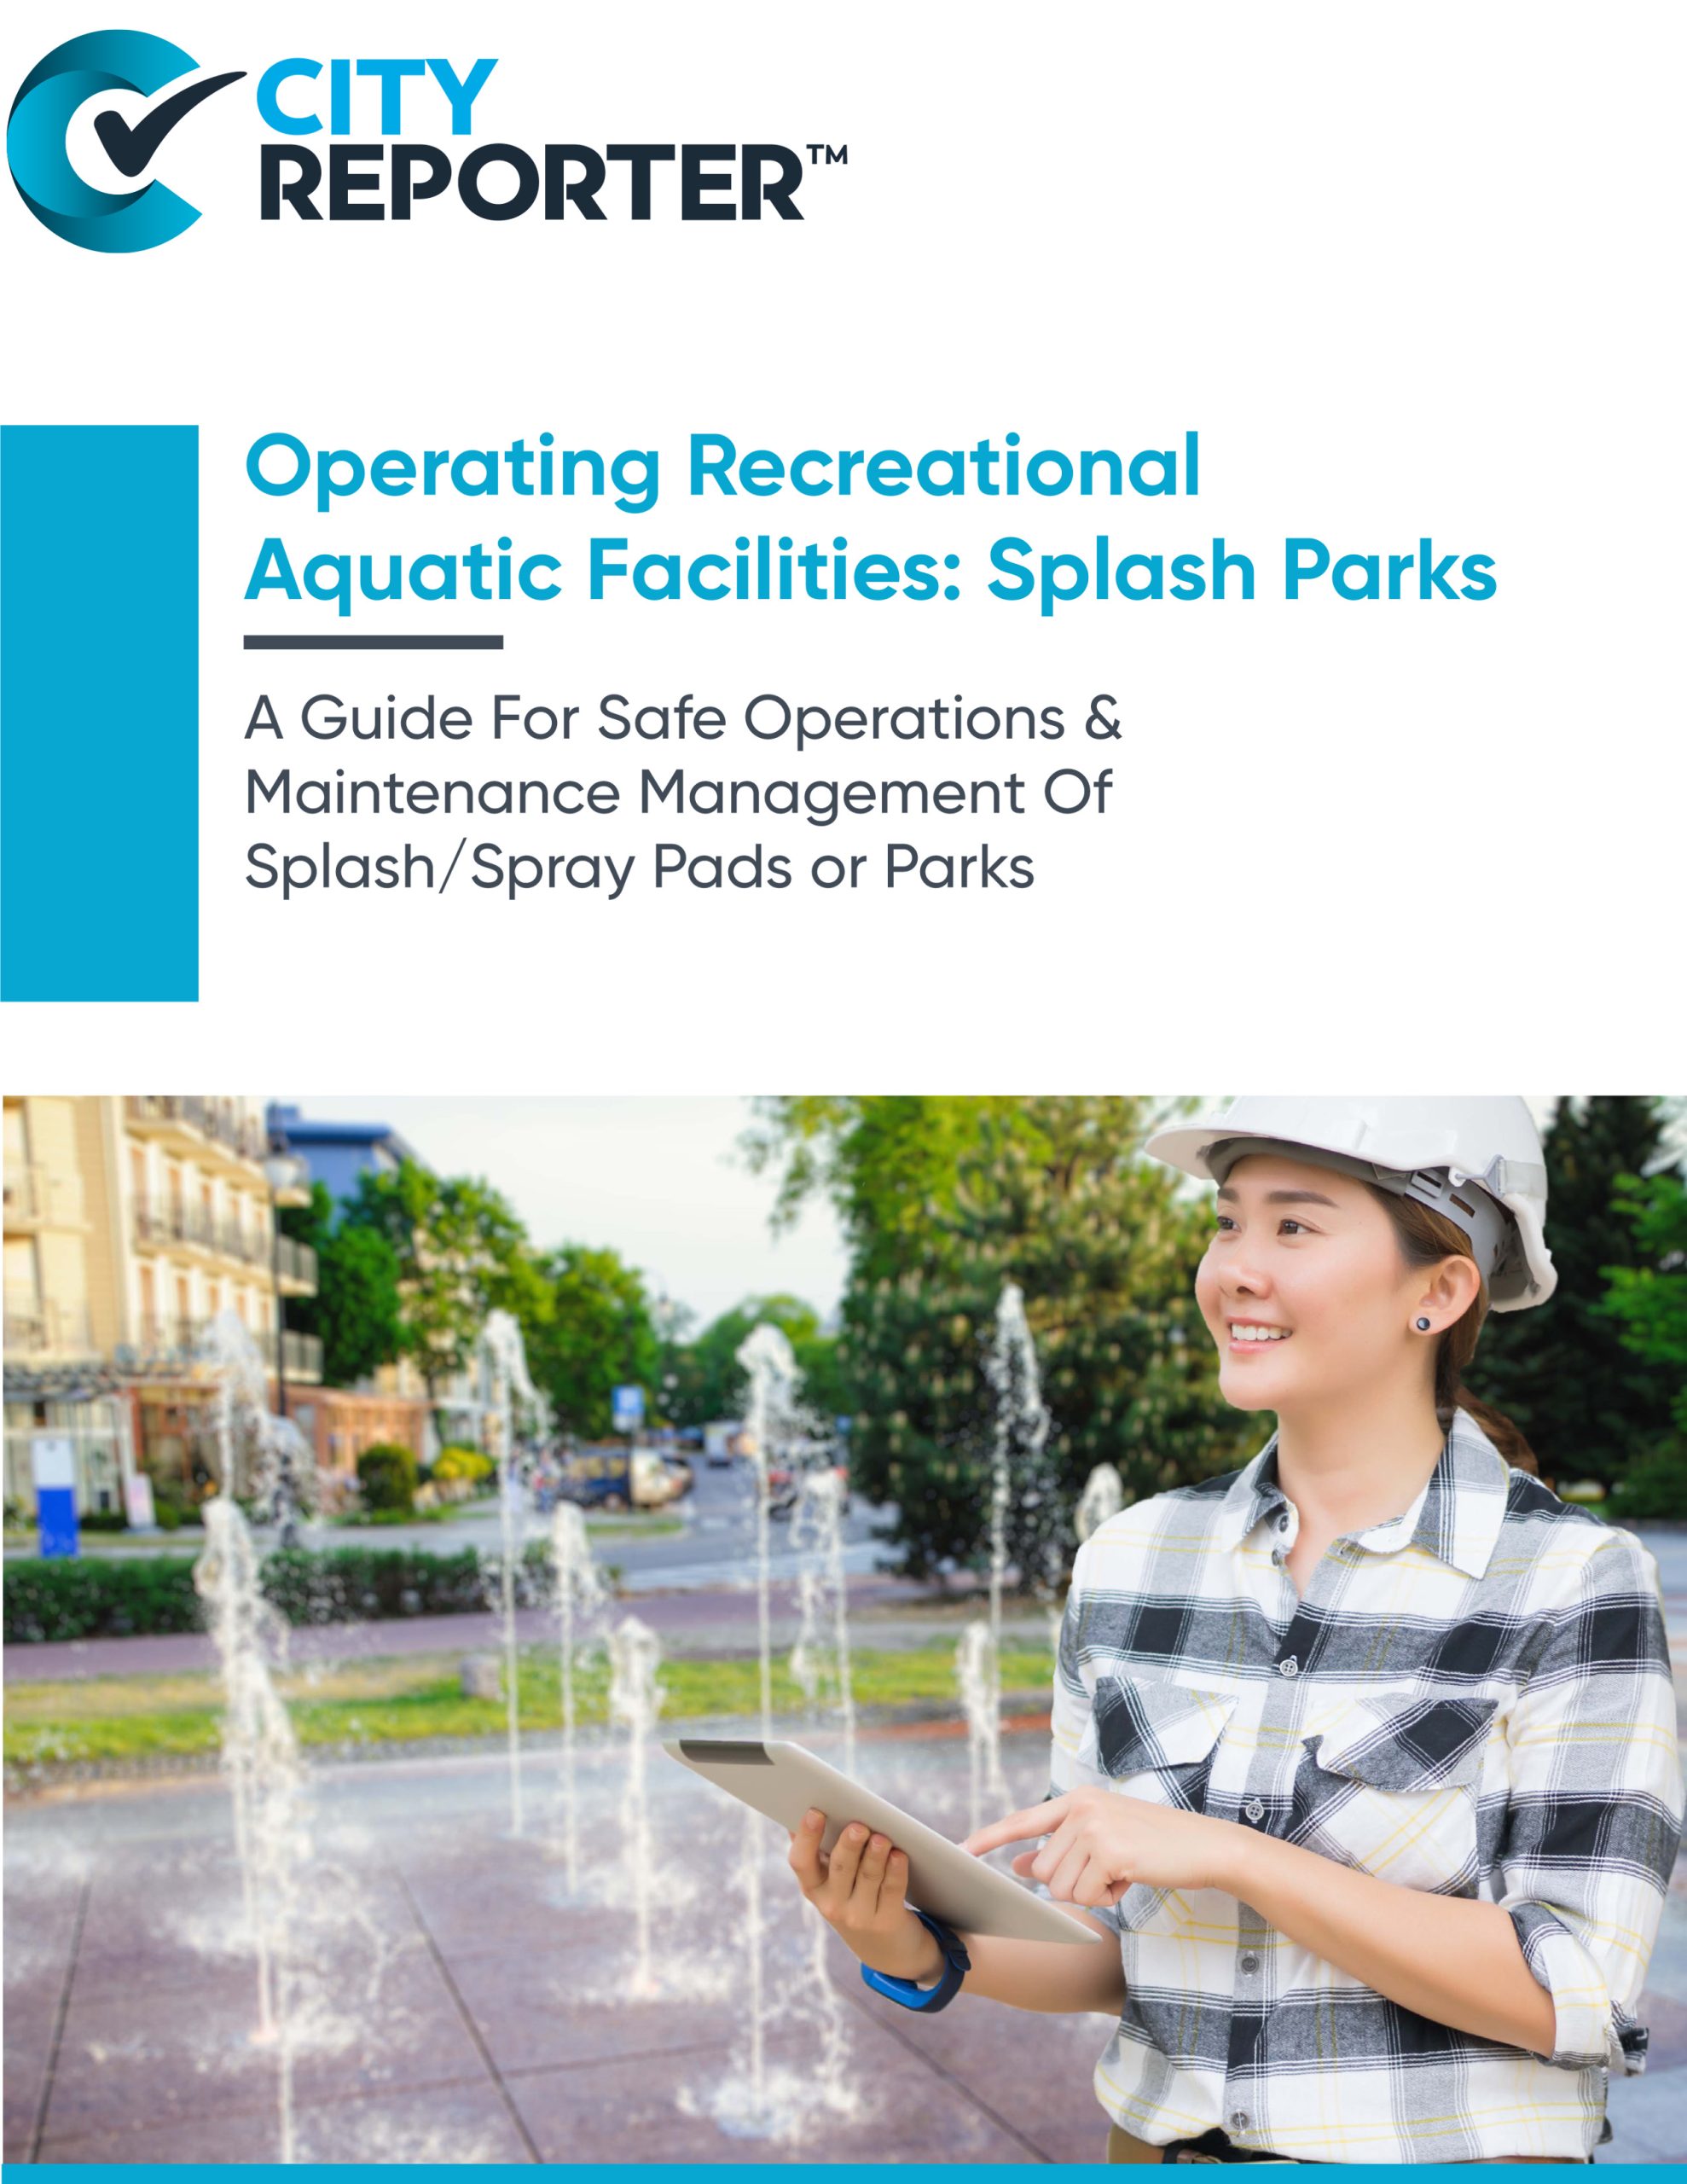 The first page of CityReporter's document - Splash Pad Maintenance Guide